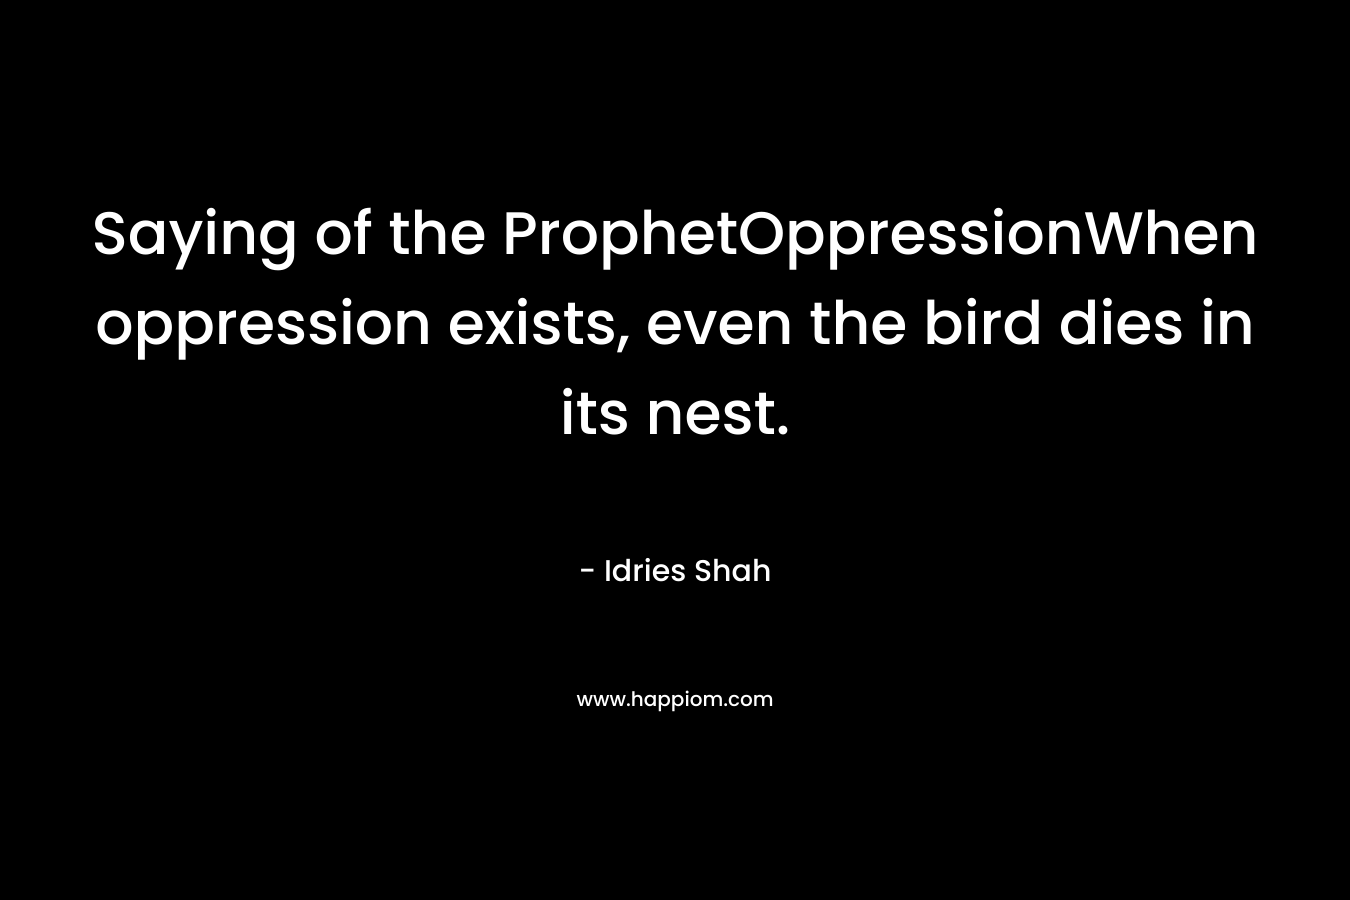 Saying of the ProphetOppressionWhen oppression exists, even the bird dies in its nest.